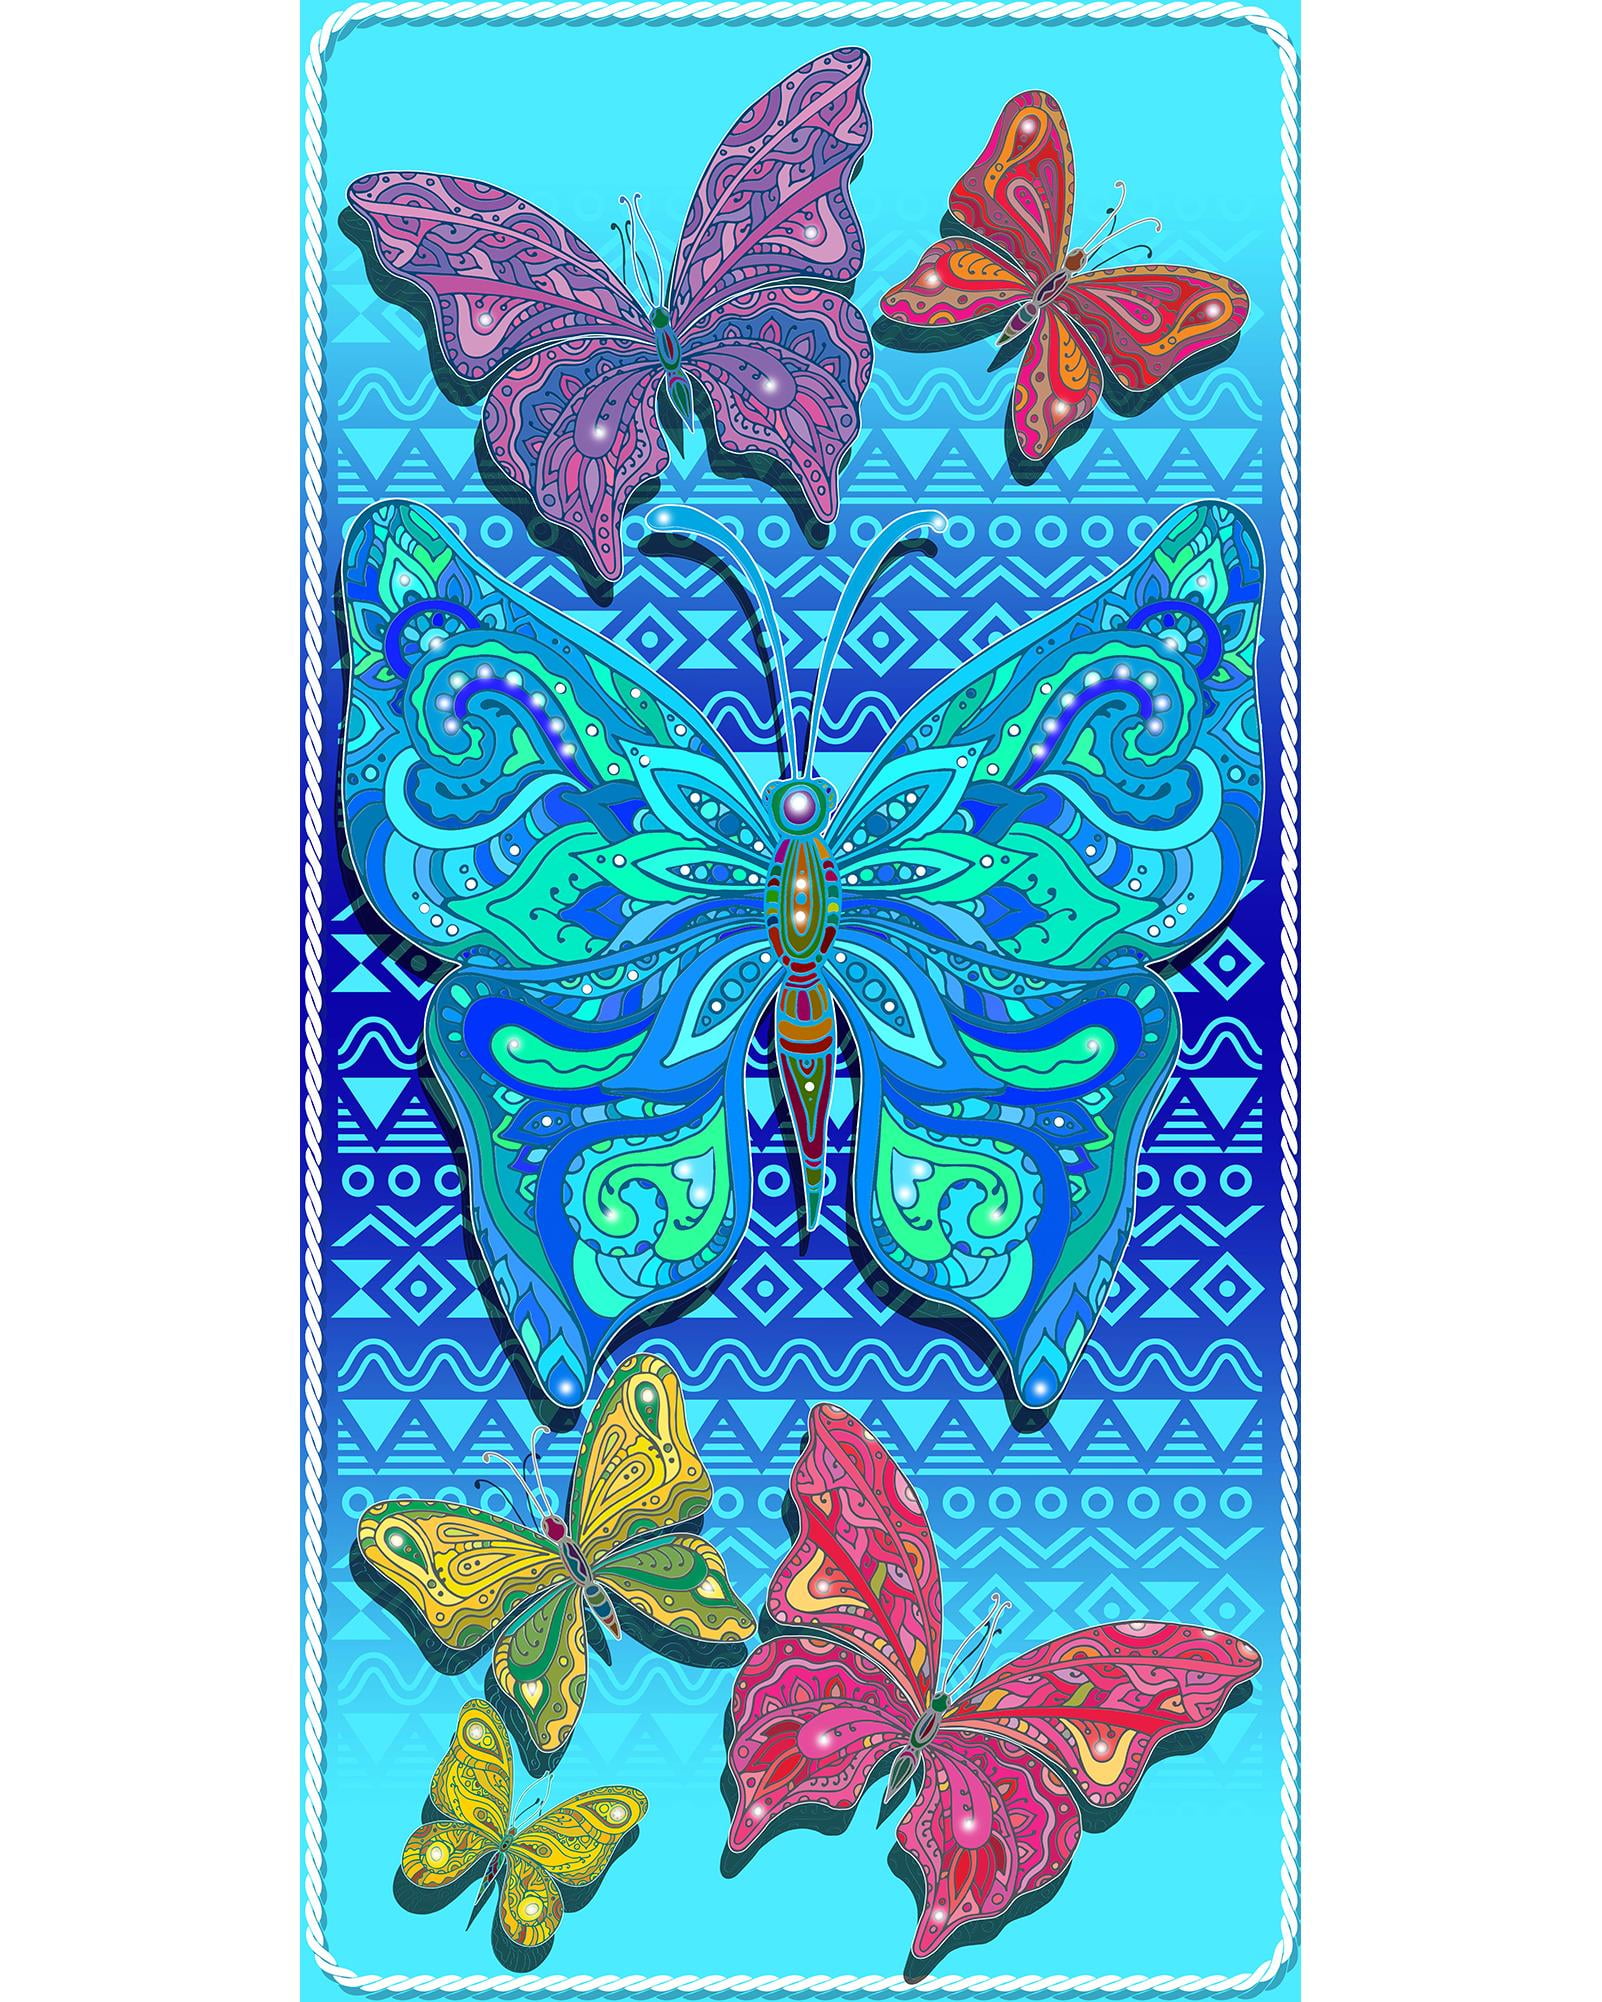 Butterfly Fly Free Cotton Beach Towel by Dawhud Direct 